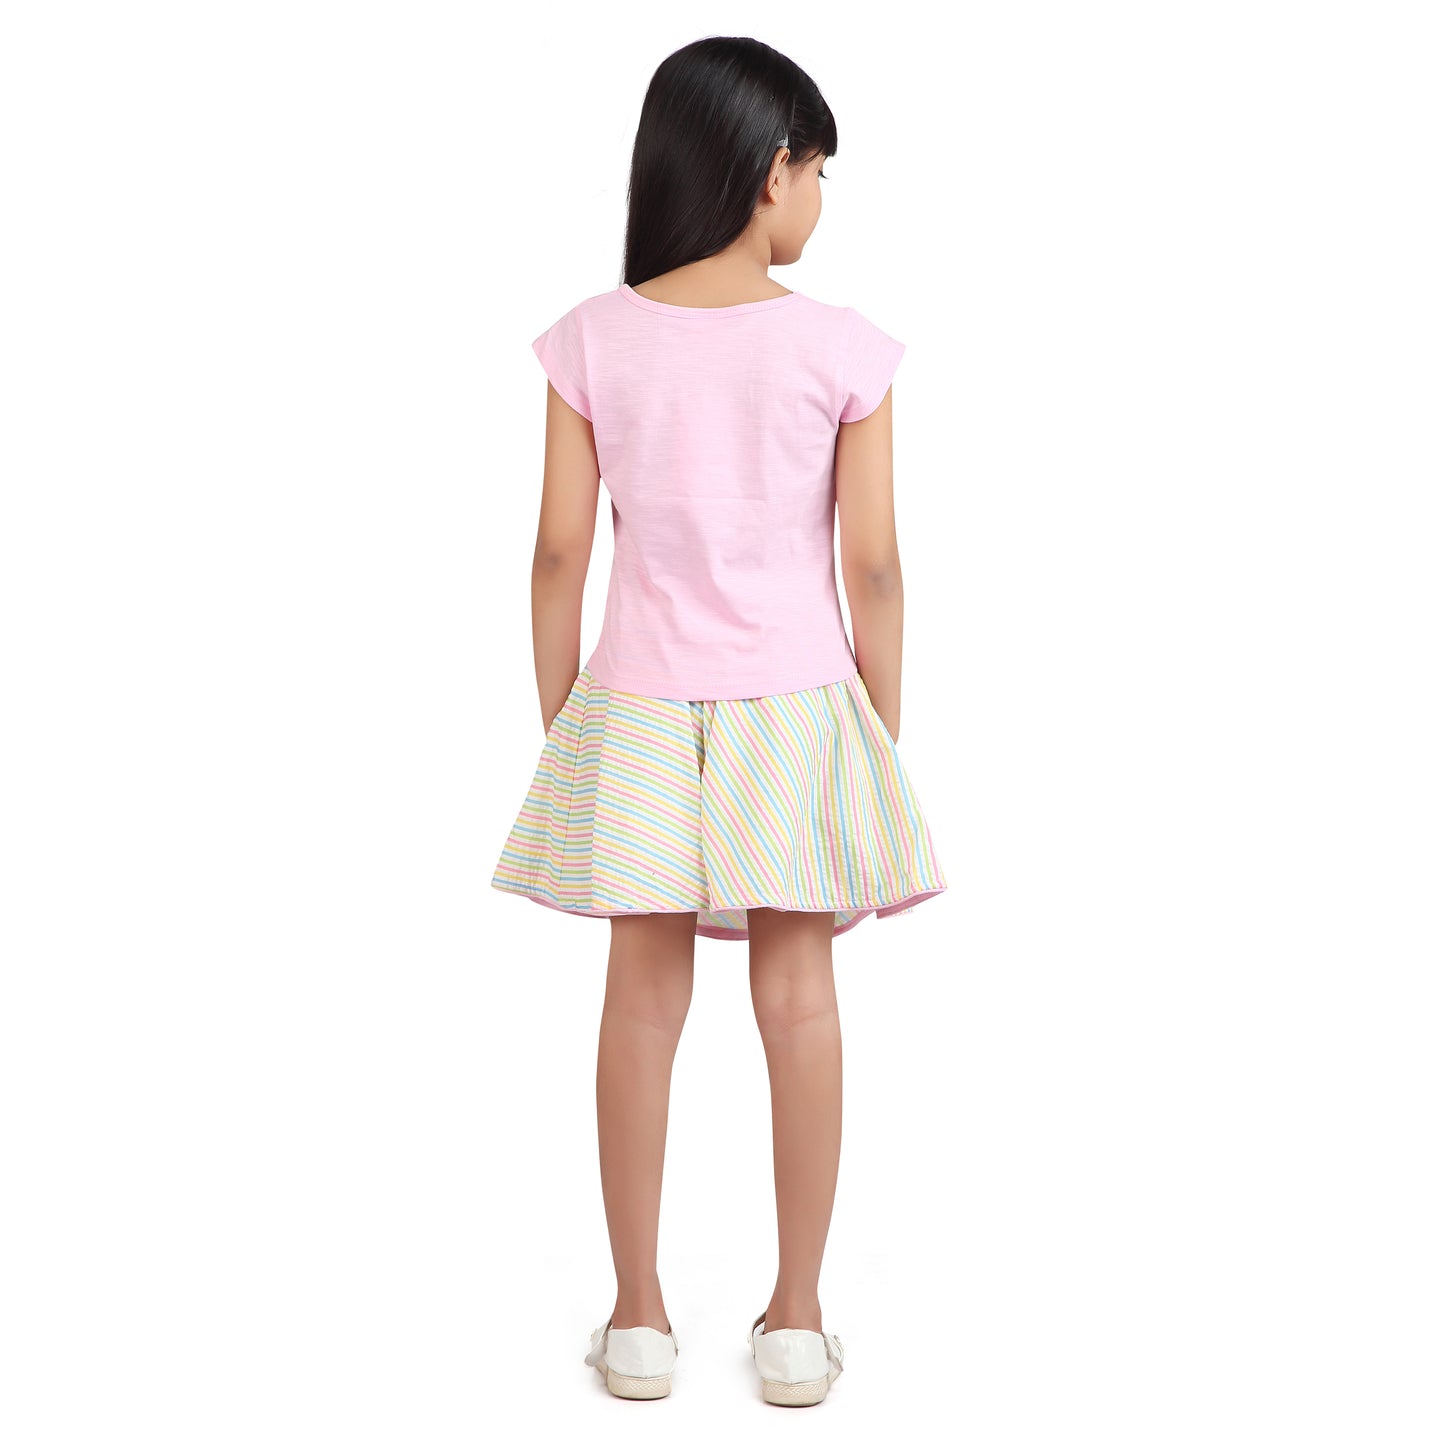 Striped Skater Pink Skirt Set With Cap Sleeves And Bow Detailing On The Waistband